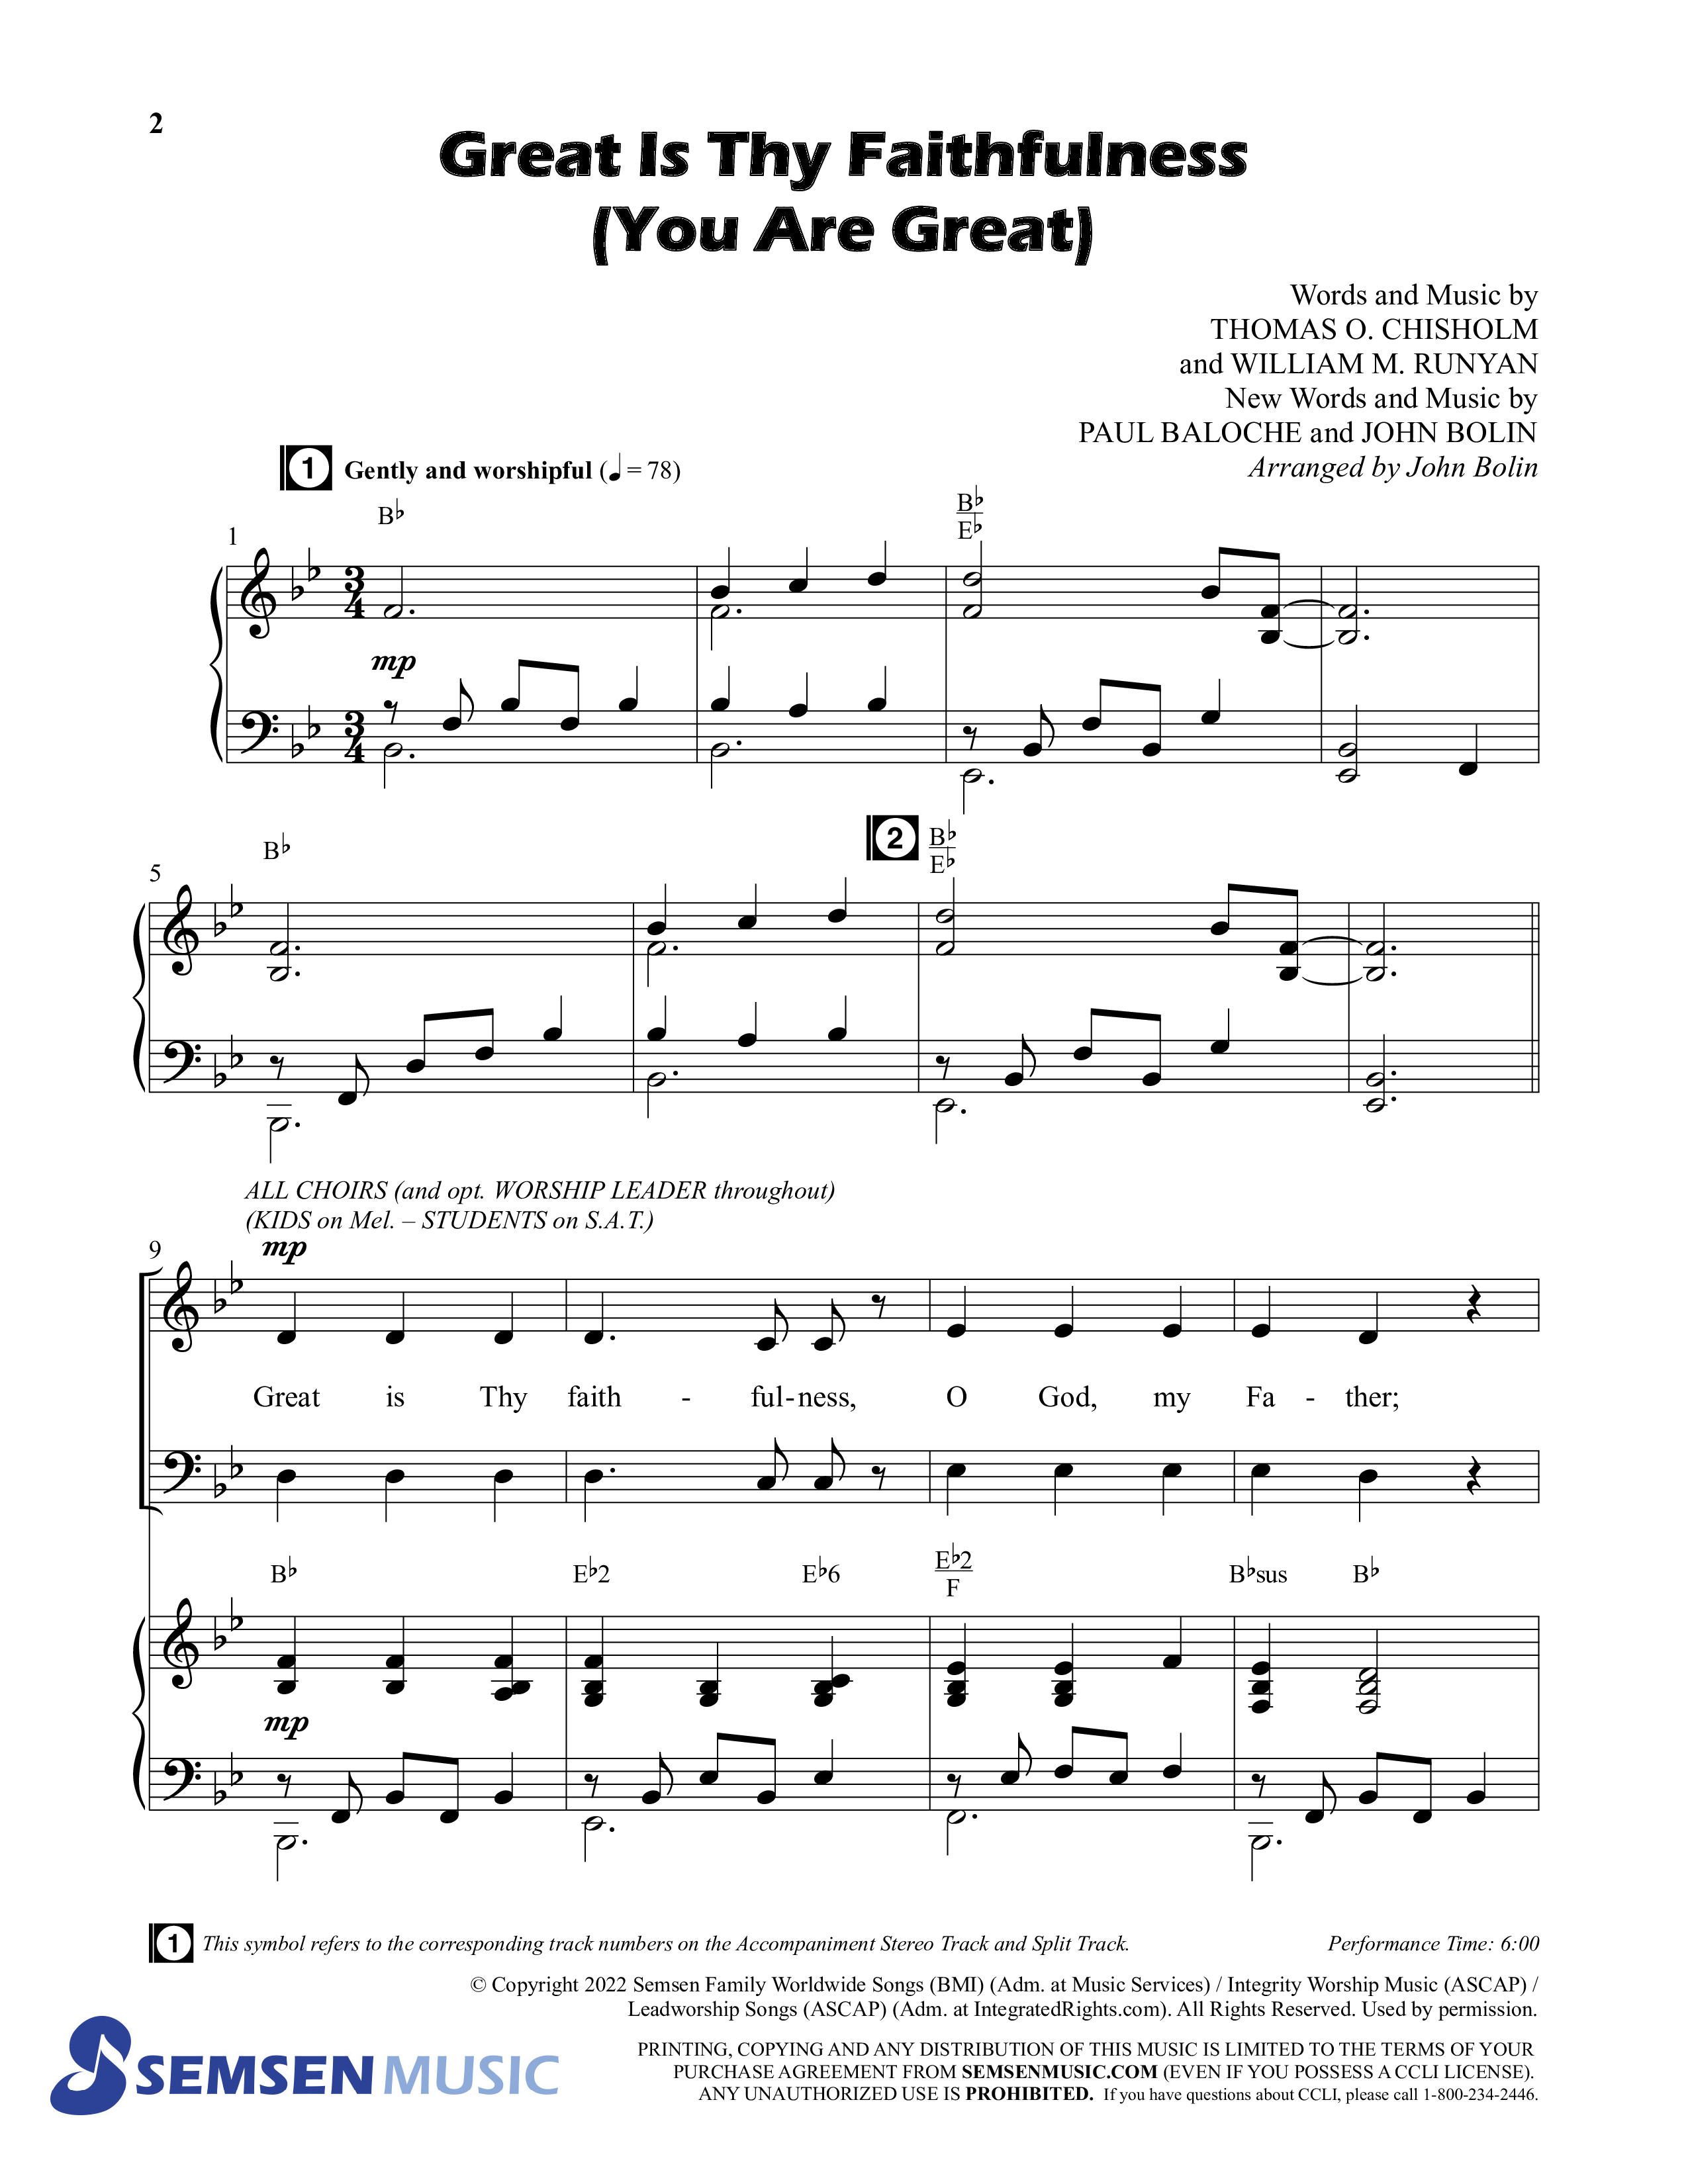 Great Is Thy Faithfulness (You Are Great) (Choral Anthem SATB) Anthem (SATB/Piano) (Semsen Music / Arr. John Bolin / Orch. David Shipps)